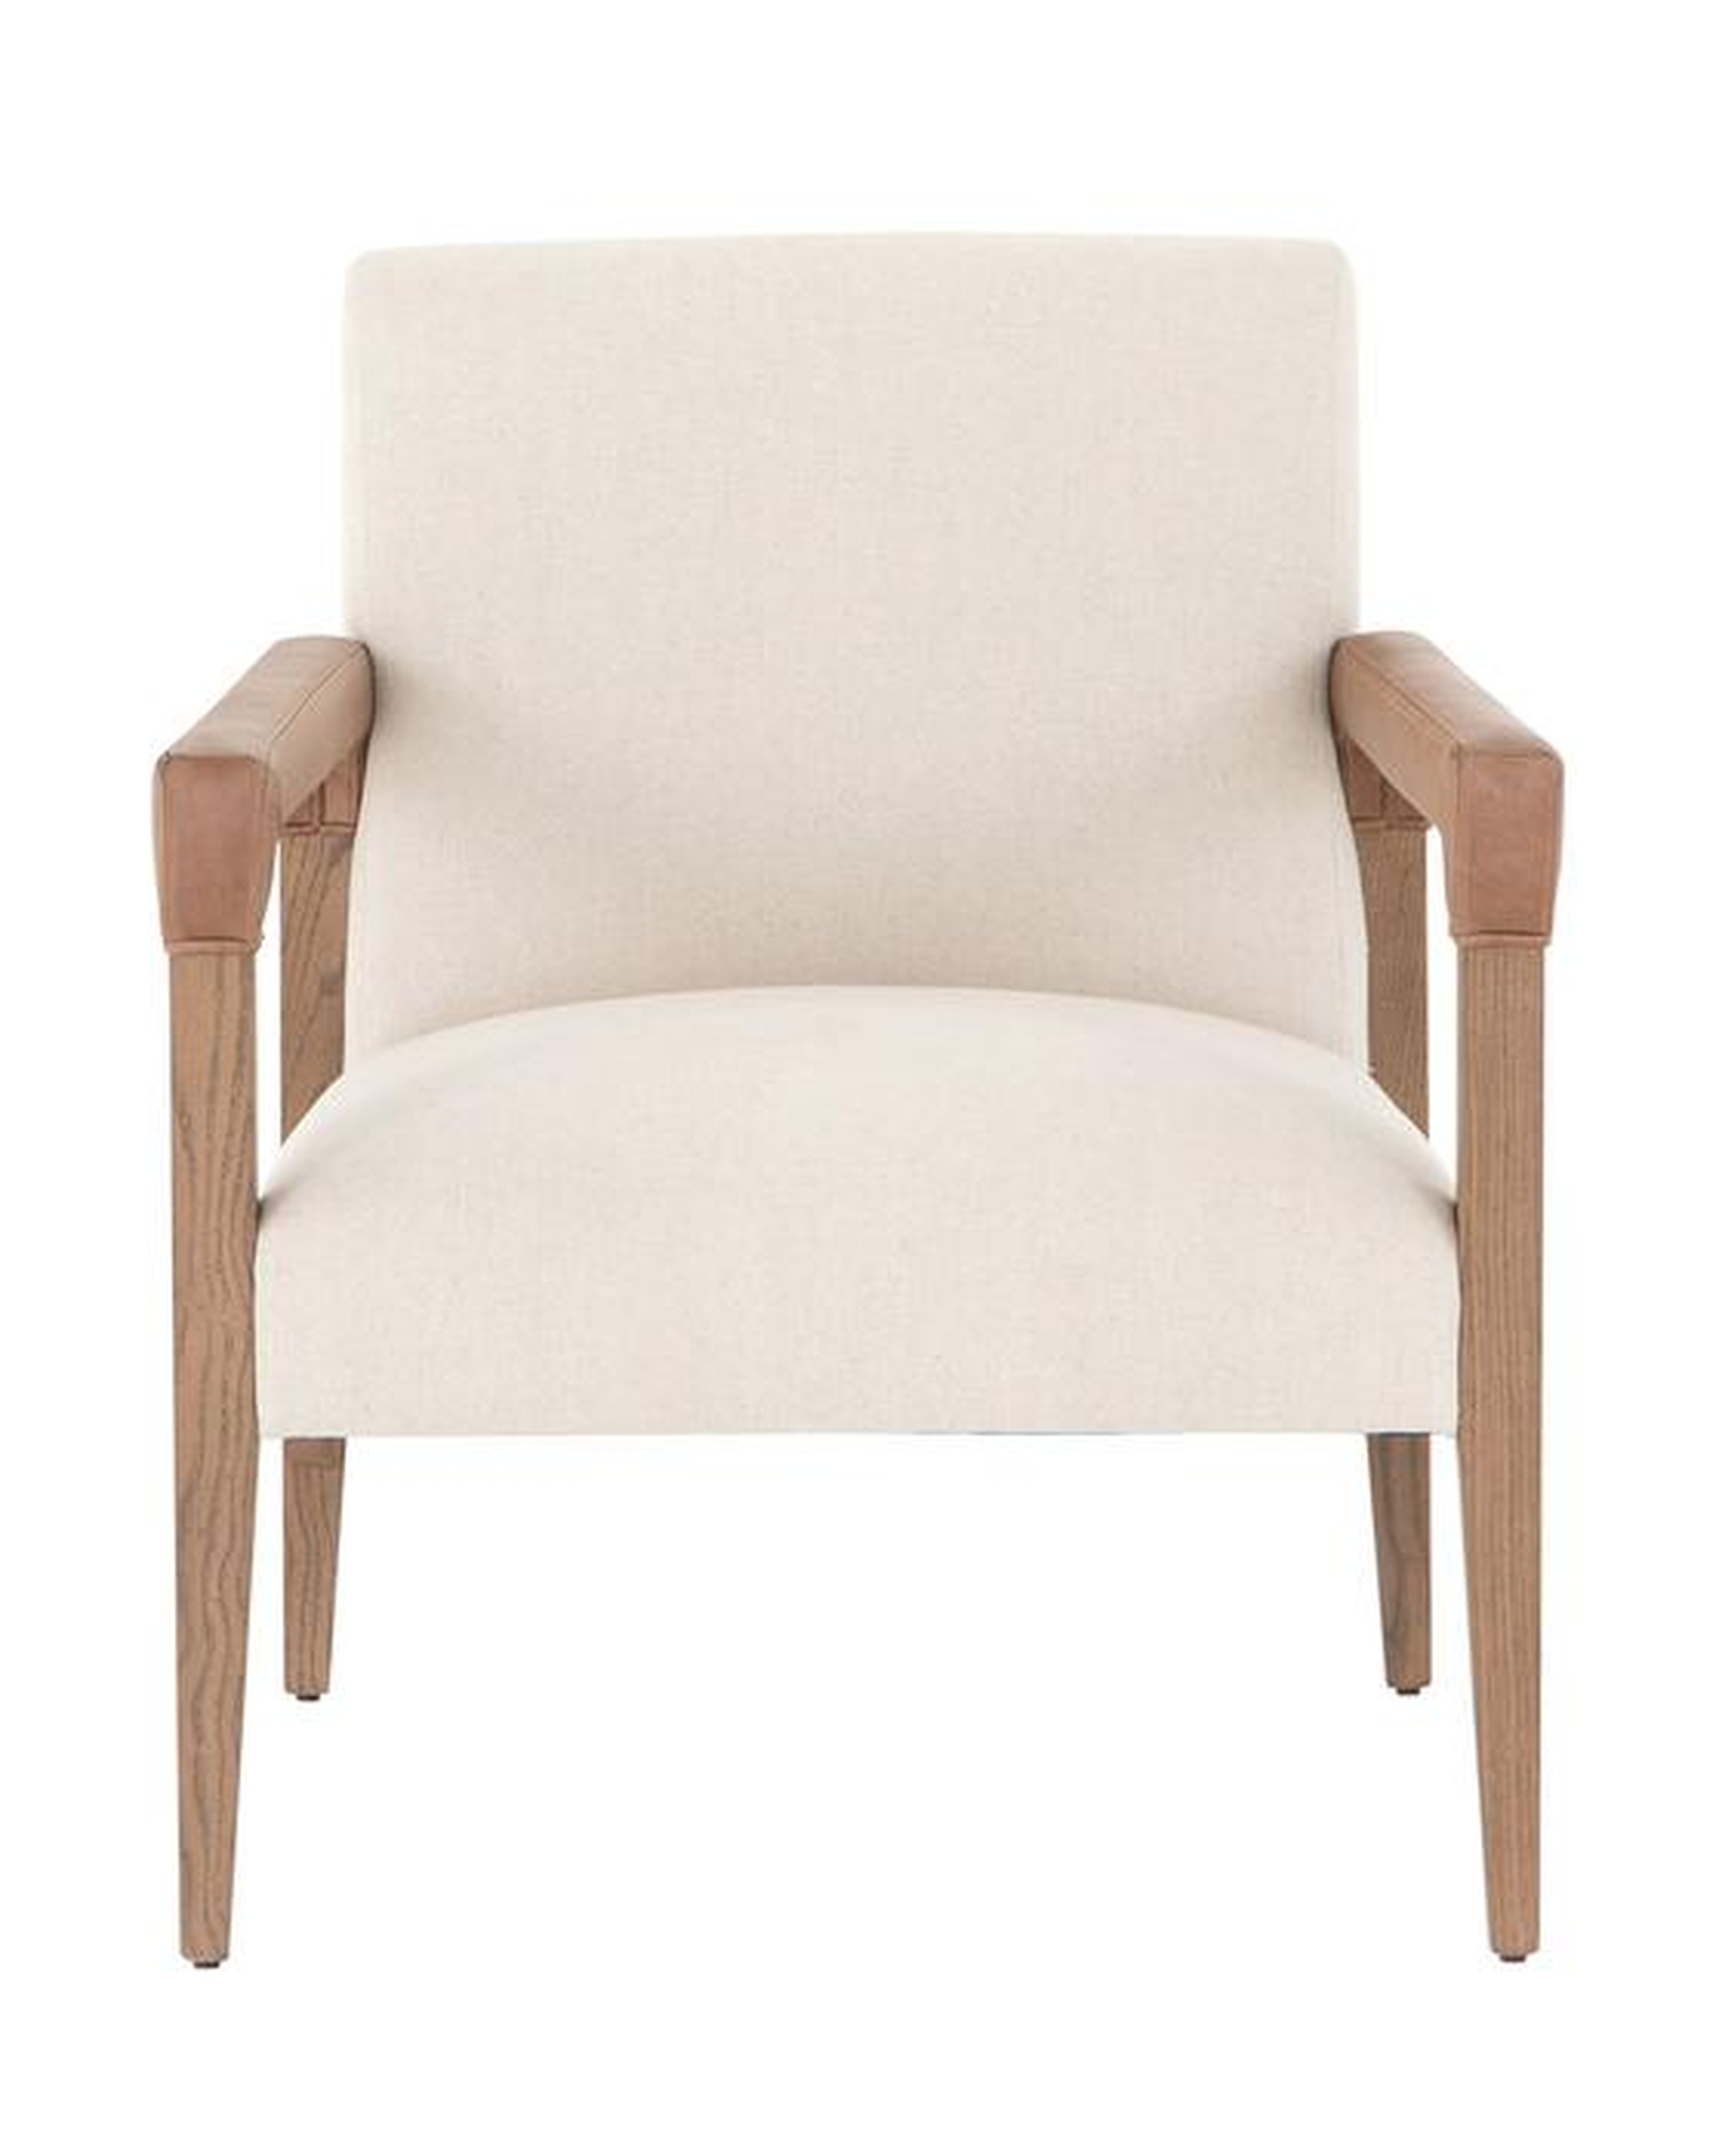 Robby Lounge Chair - McGee & Co.